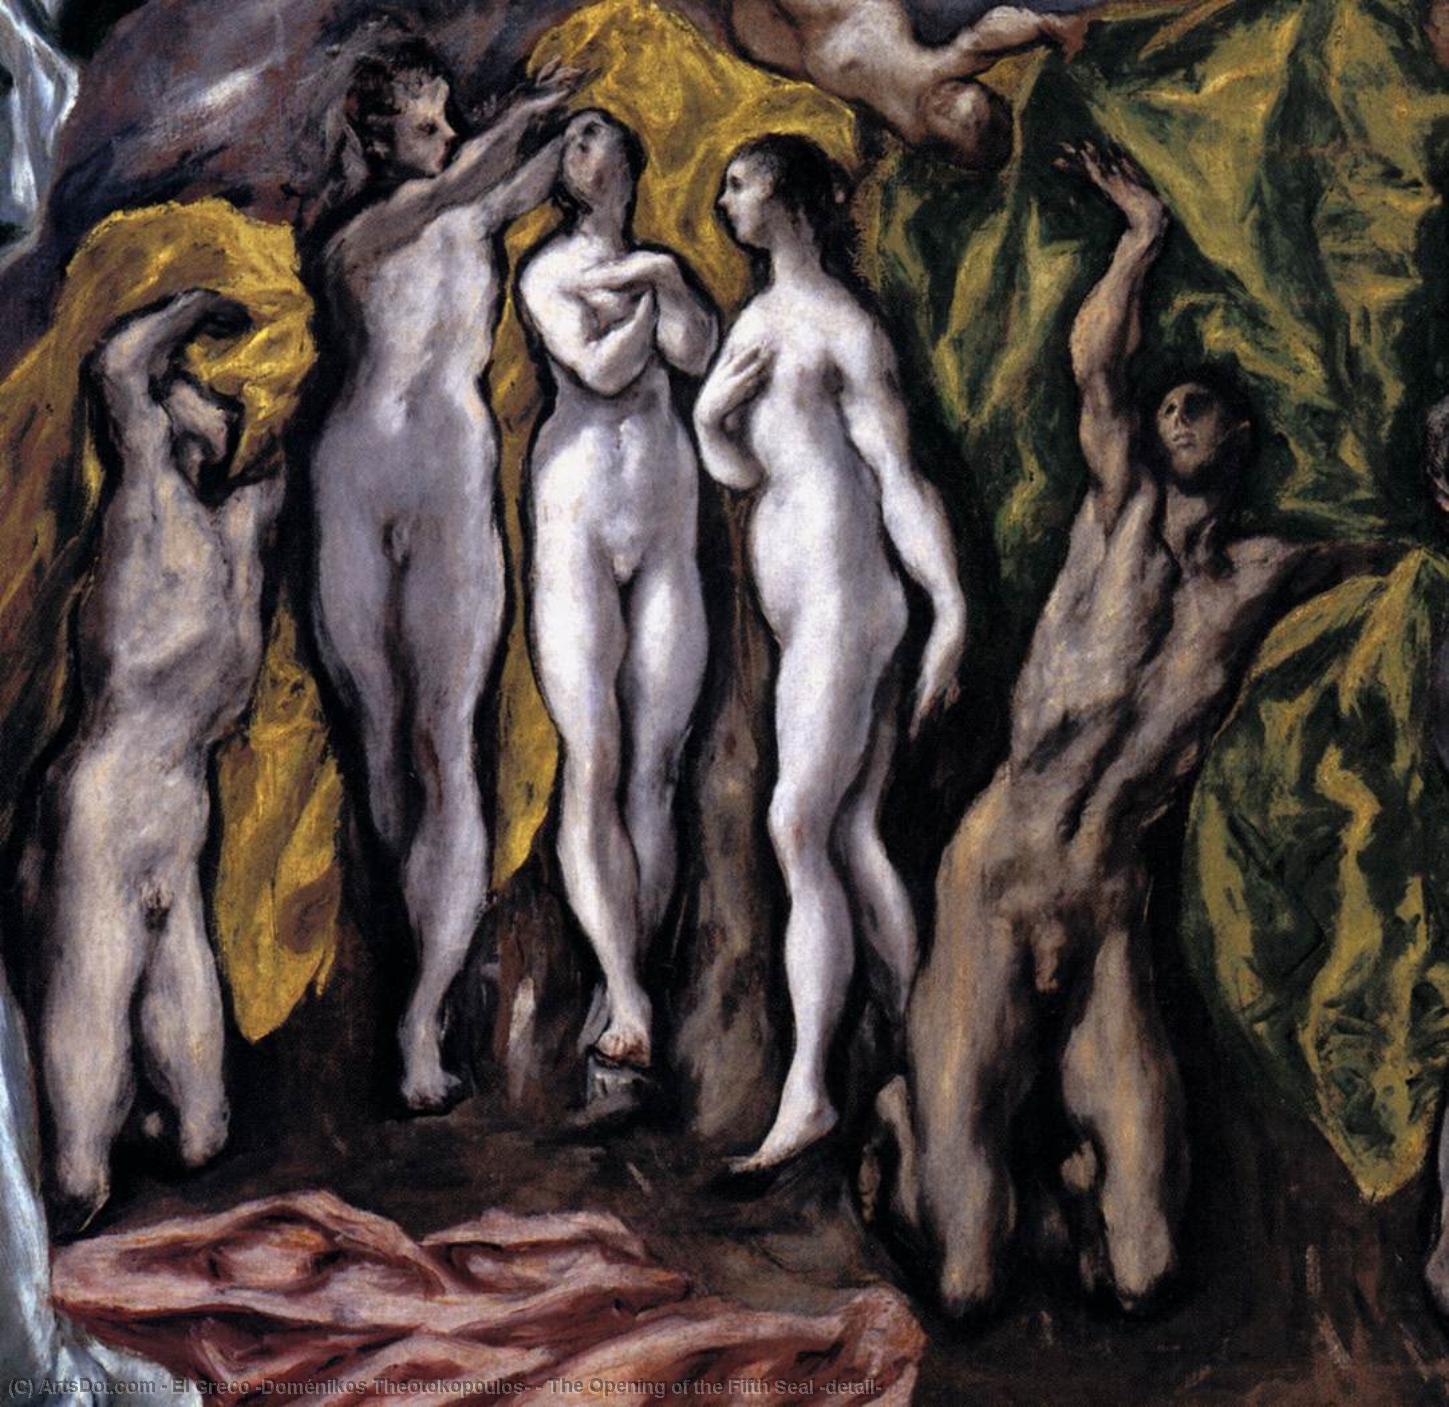 WikiOO.org - 백과 사전 - 회화, 삽화 El Greco (Doménikos Theotokopoulos) - The Opening of the Fifth Seal (detail)